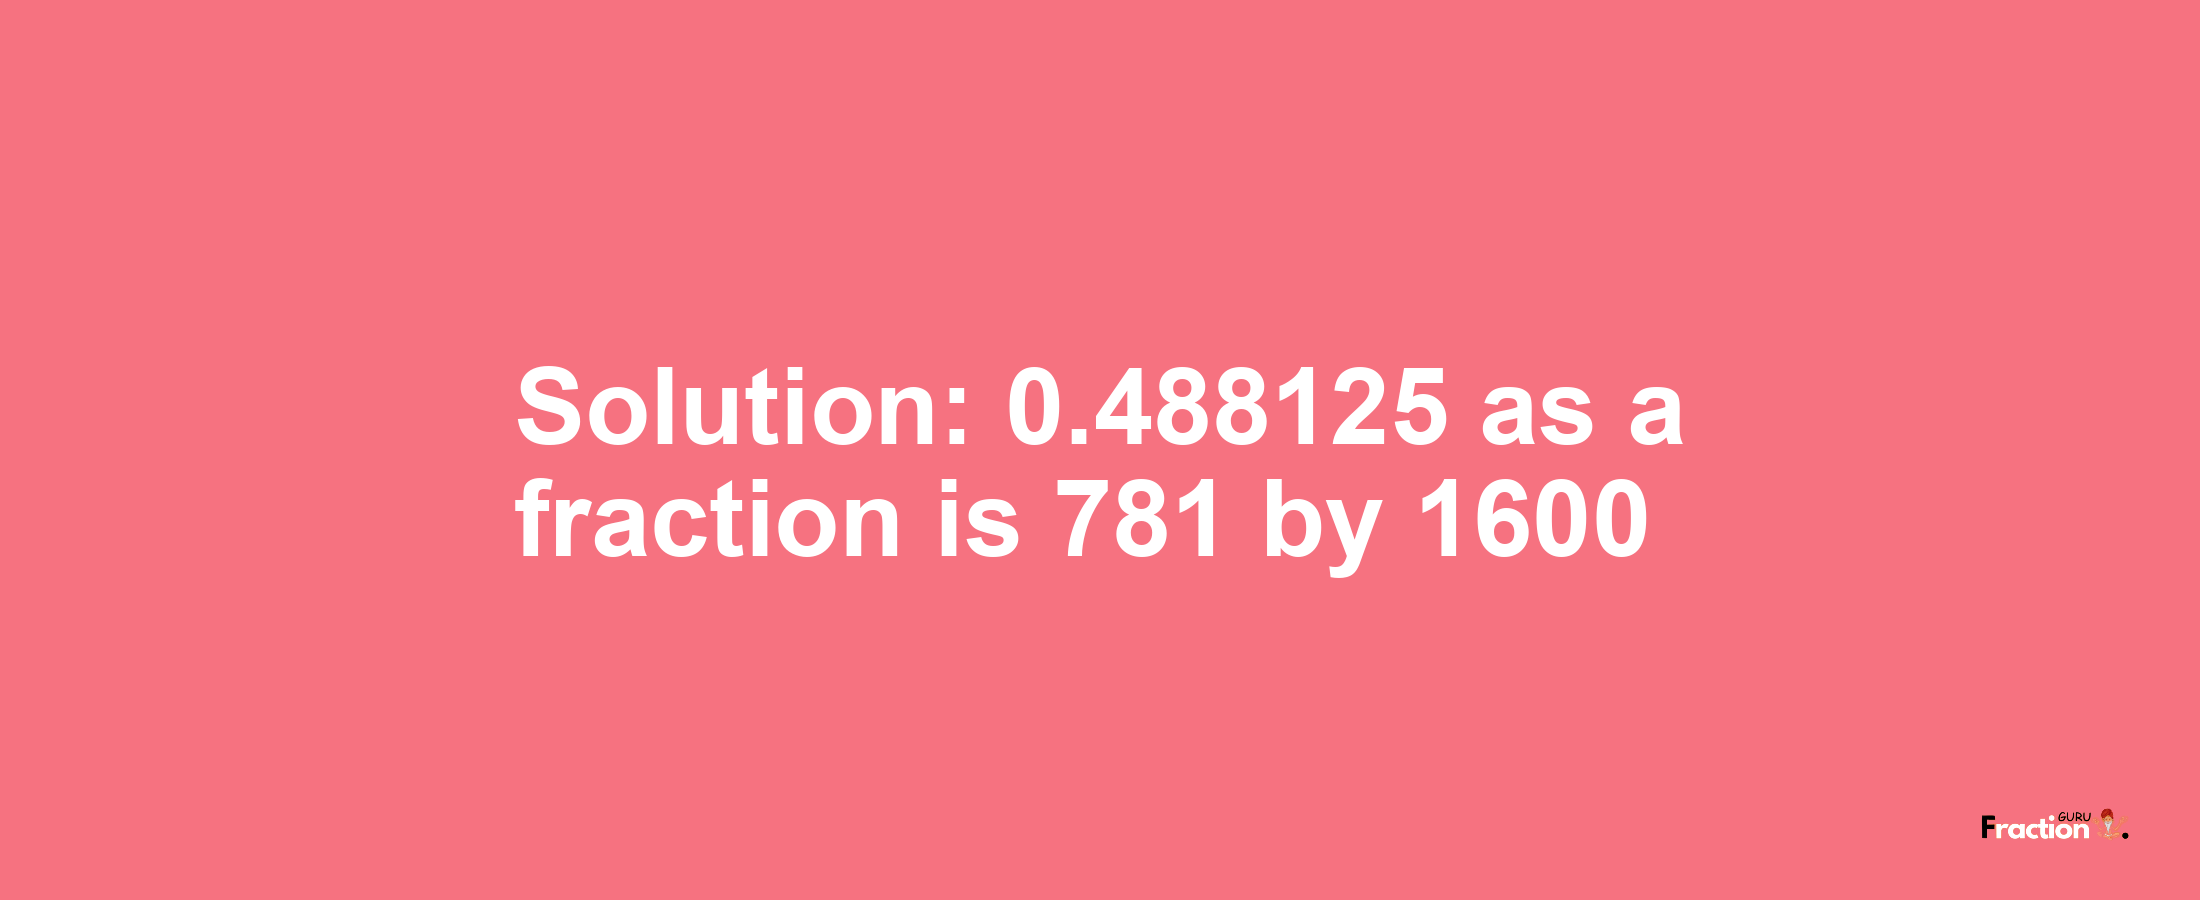 Solution:0.488125 as a fraction is 781/1600